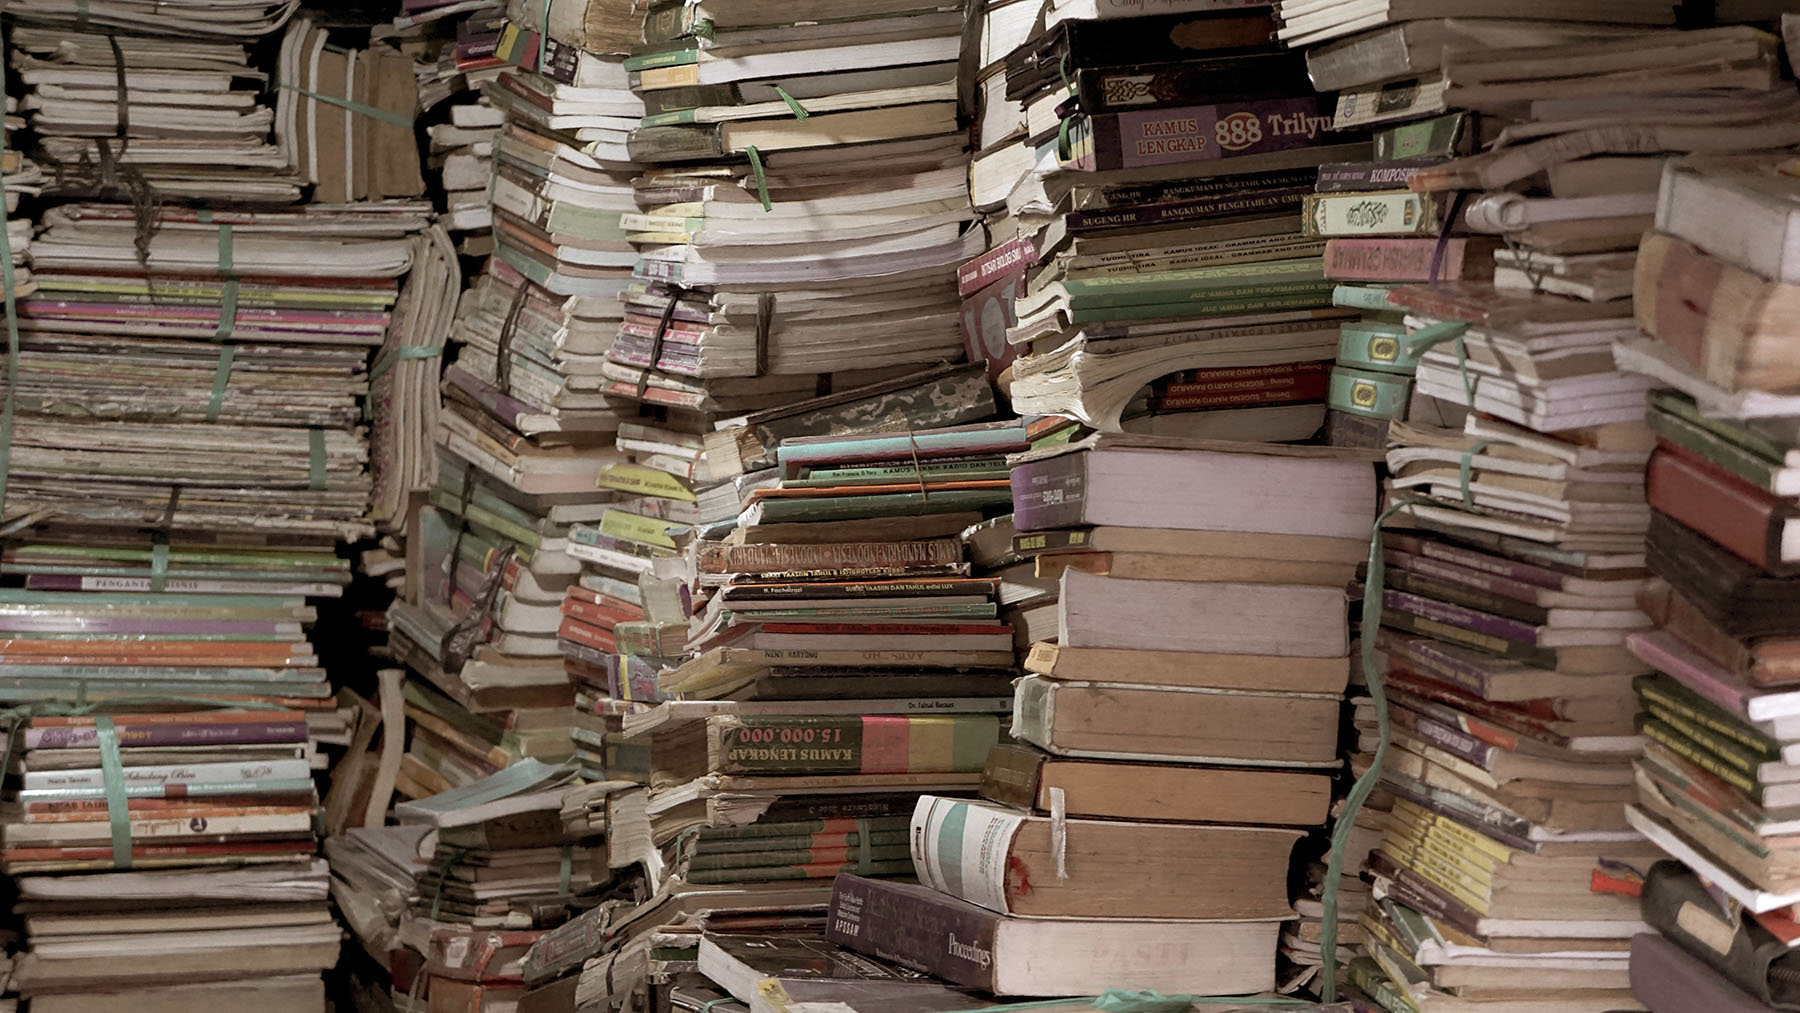 cluttered stacks of books